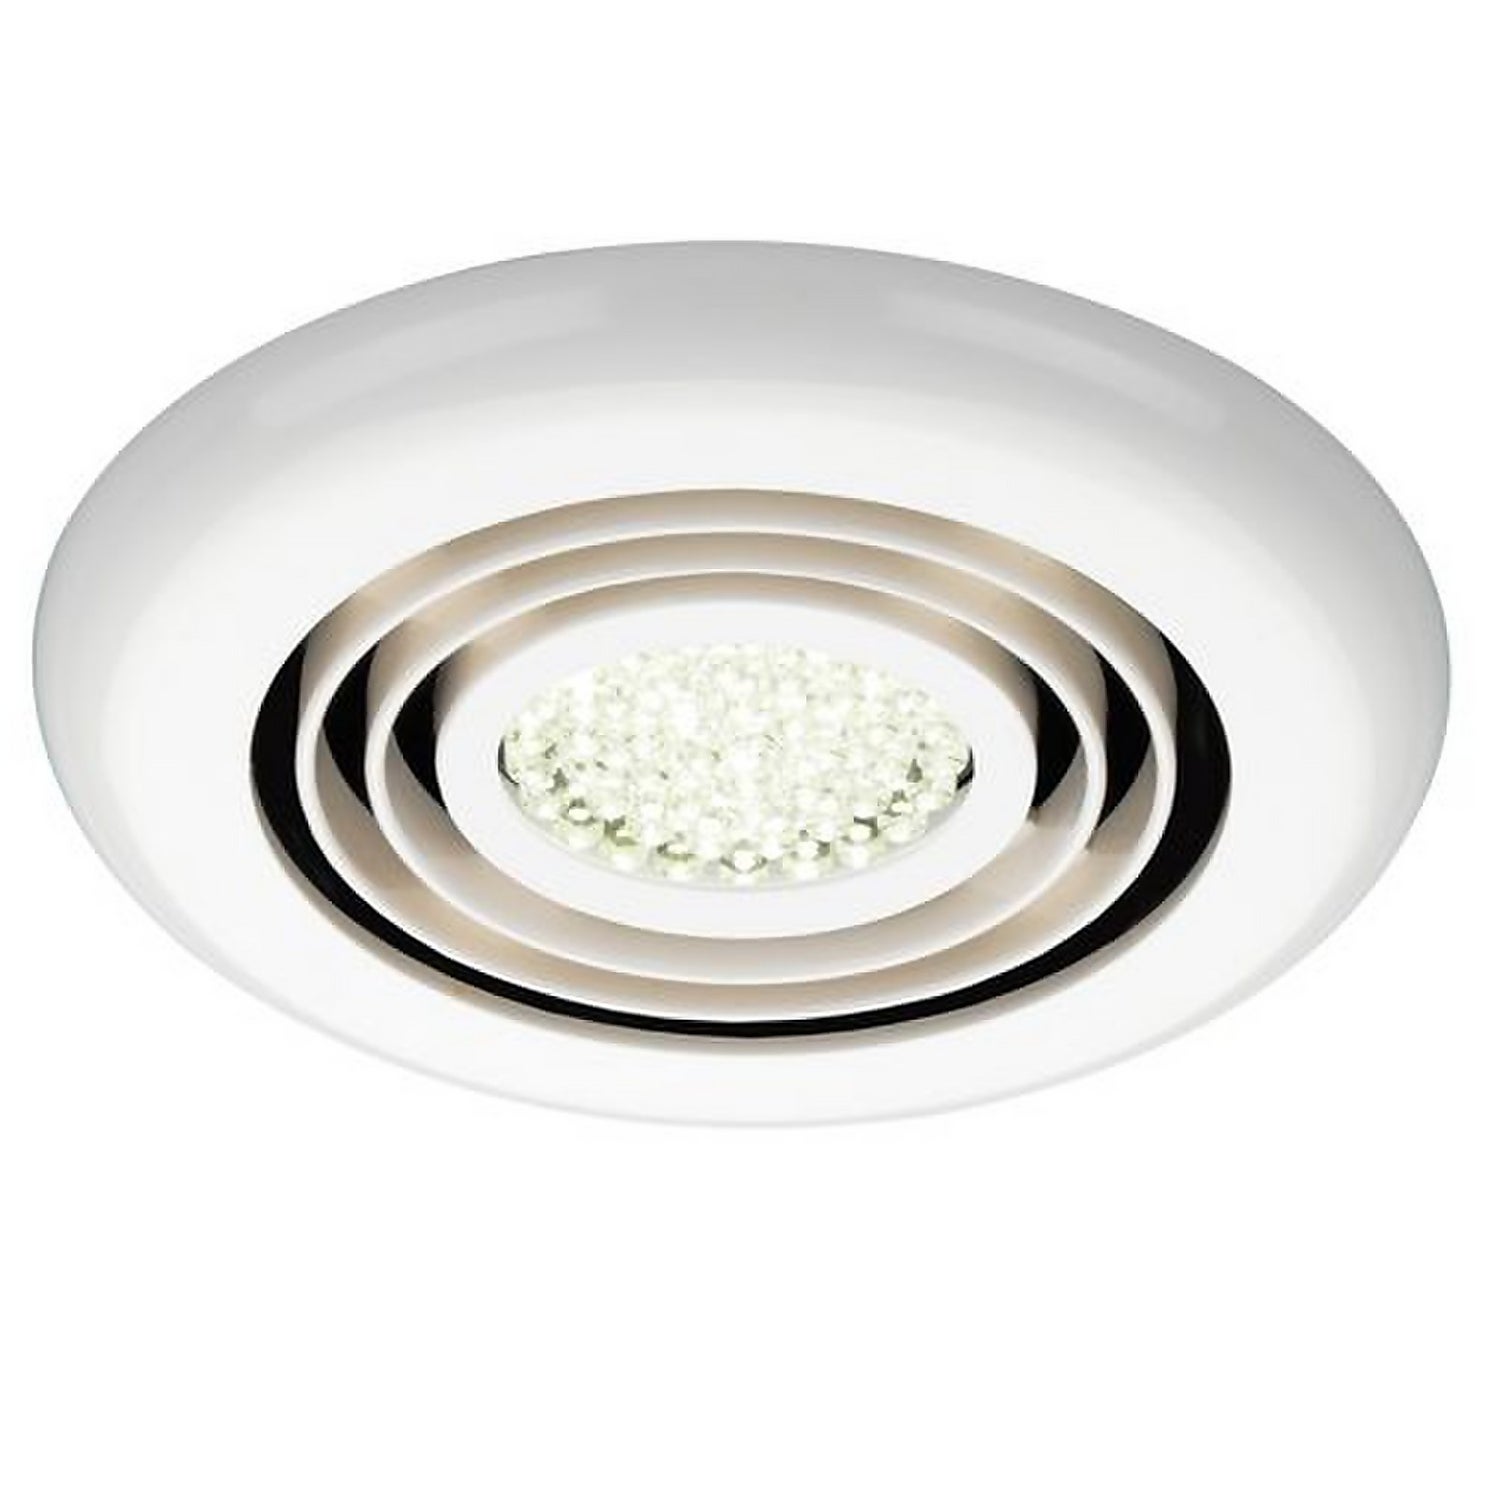 Rapide Inline Ceiling Mounted Bathroom Extractor Fan with LED Lighting - White